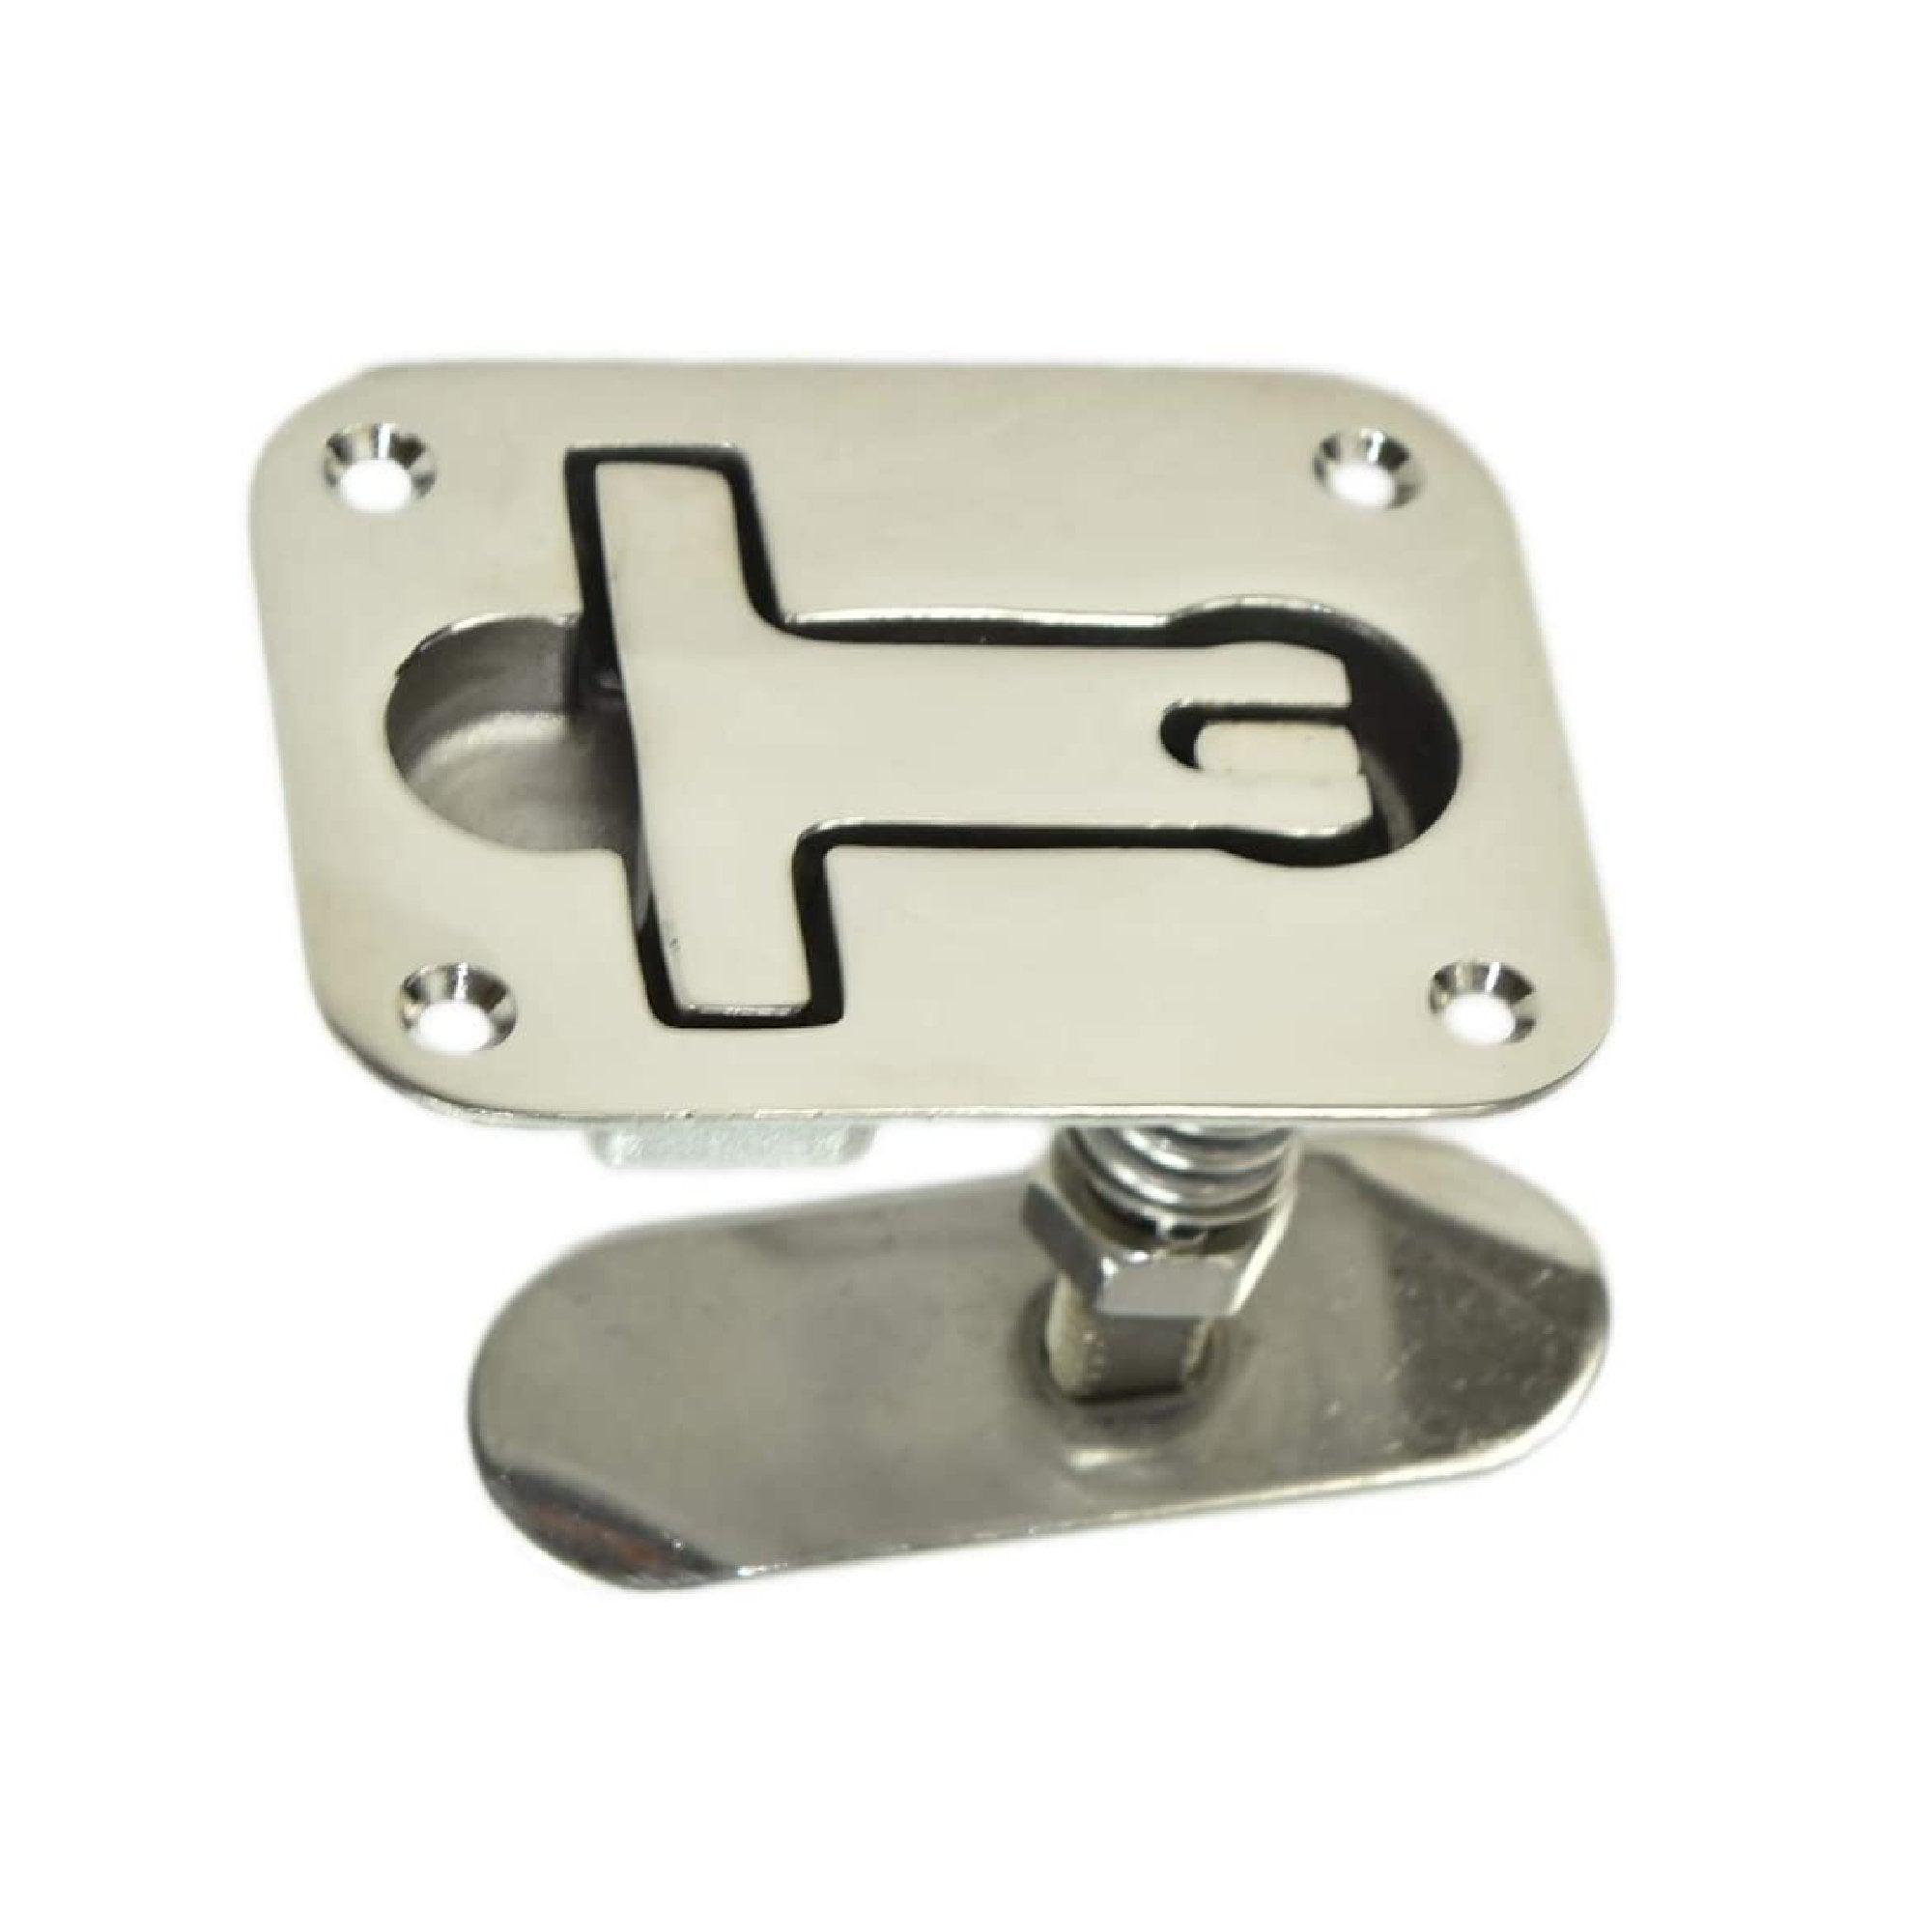 Marine City 316 Stainless Steel Boat Cam Latch Marine Grade T-Handle for Fishing Boat Yacht Marine Accessories 3-13/16 inch 3 inch